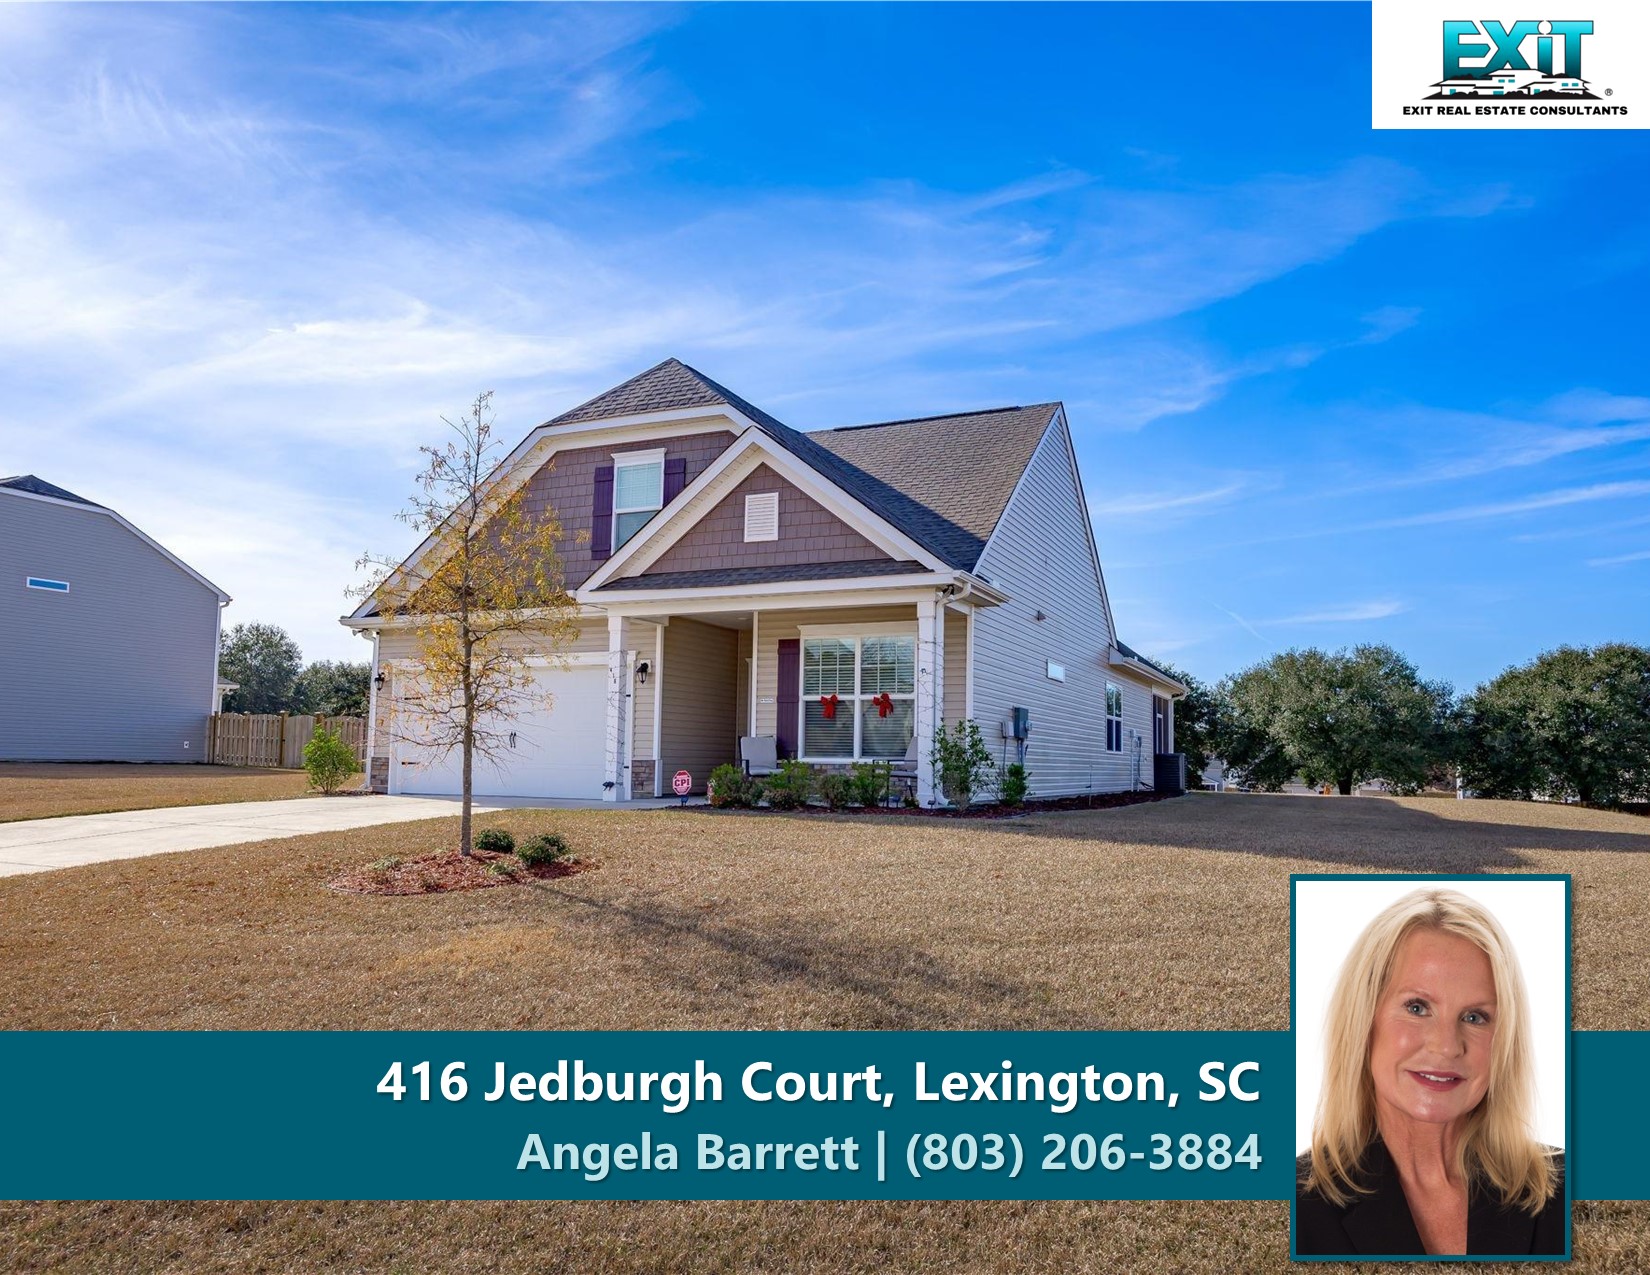 Just listed in Carolina Acres